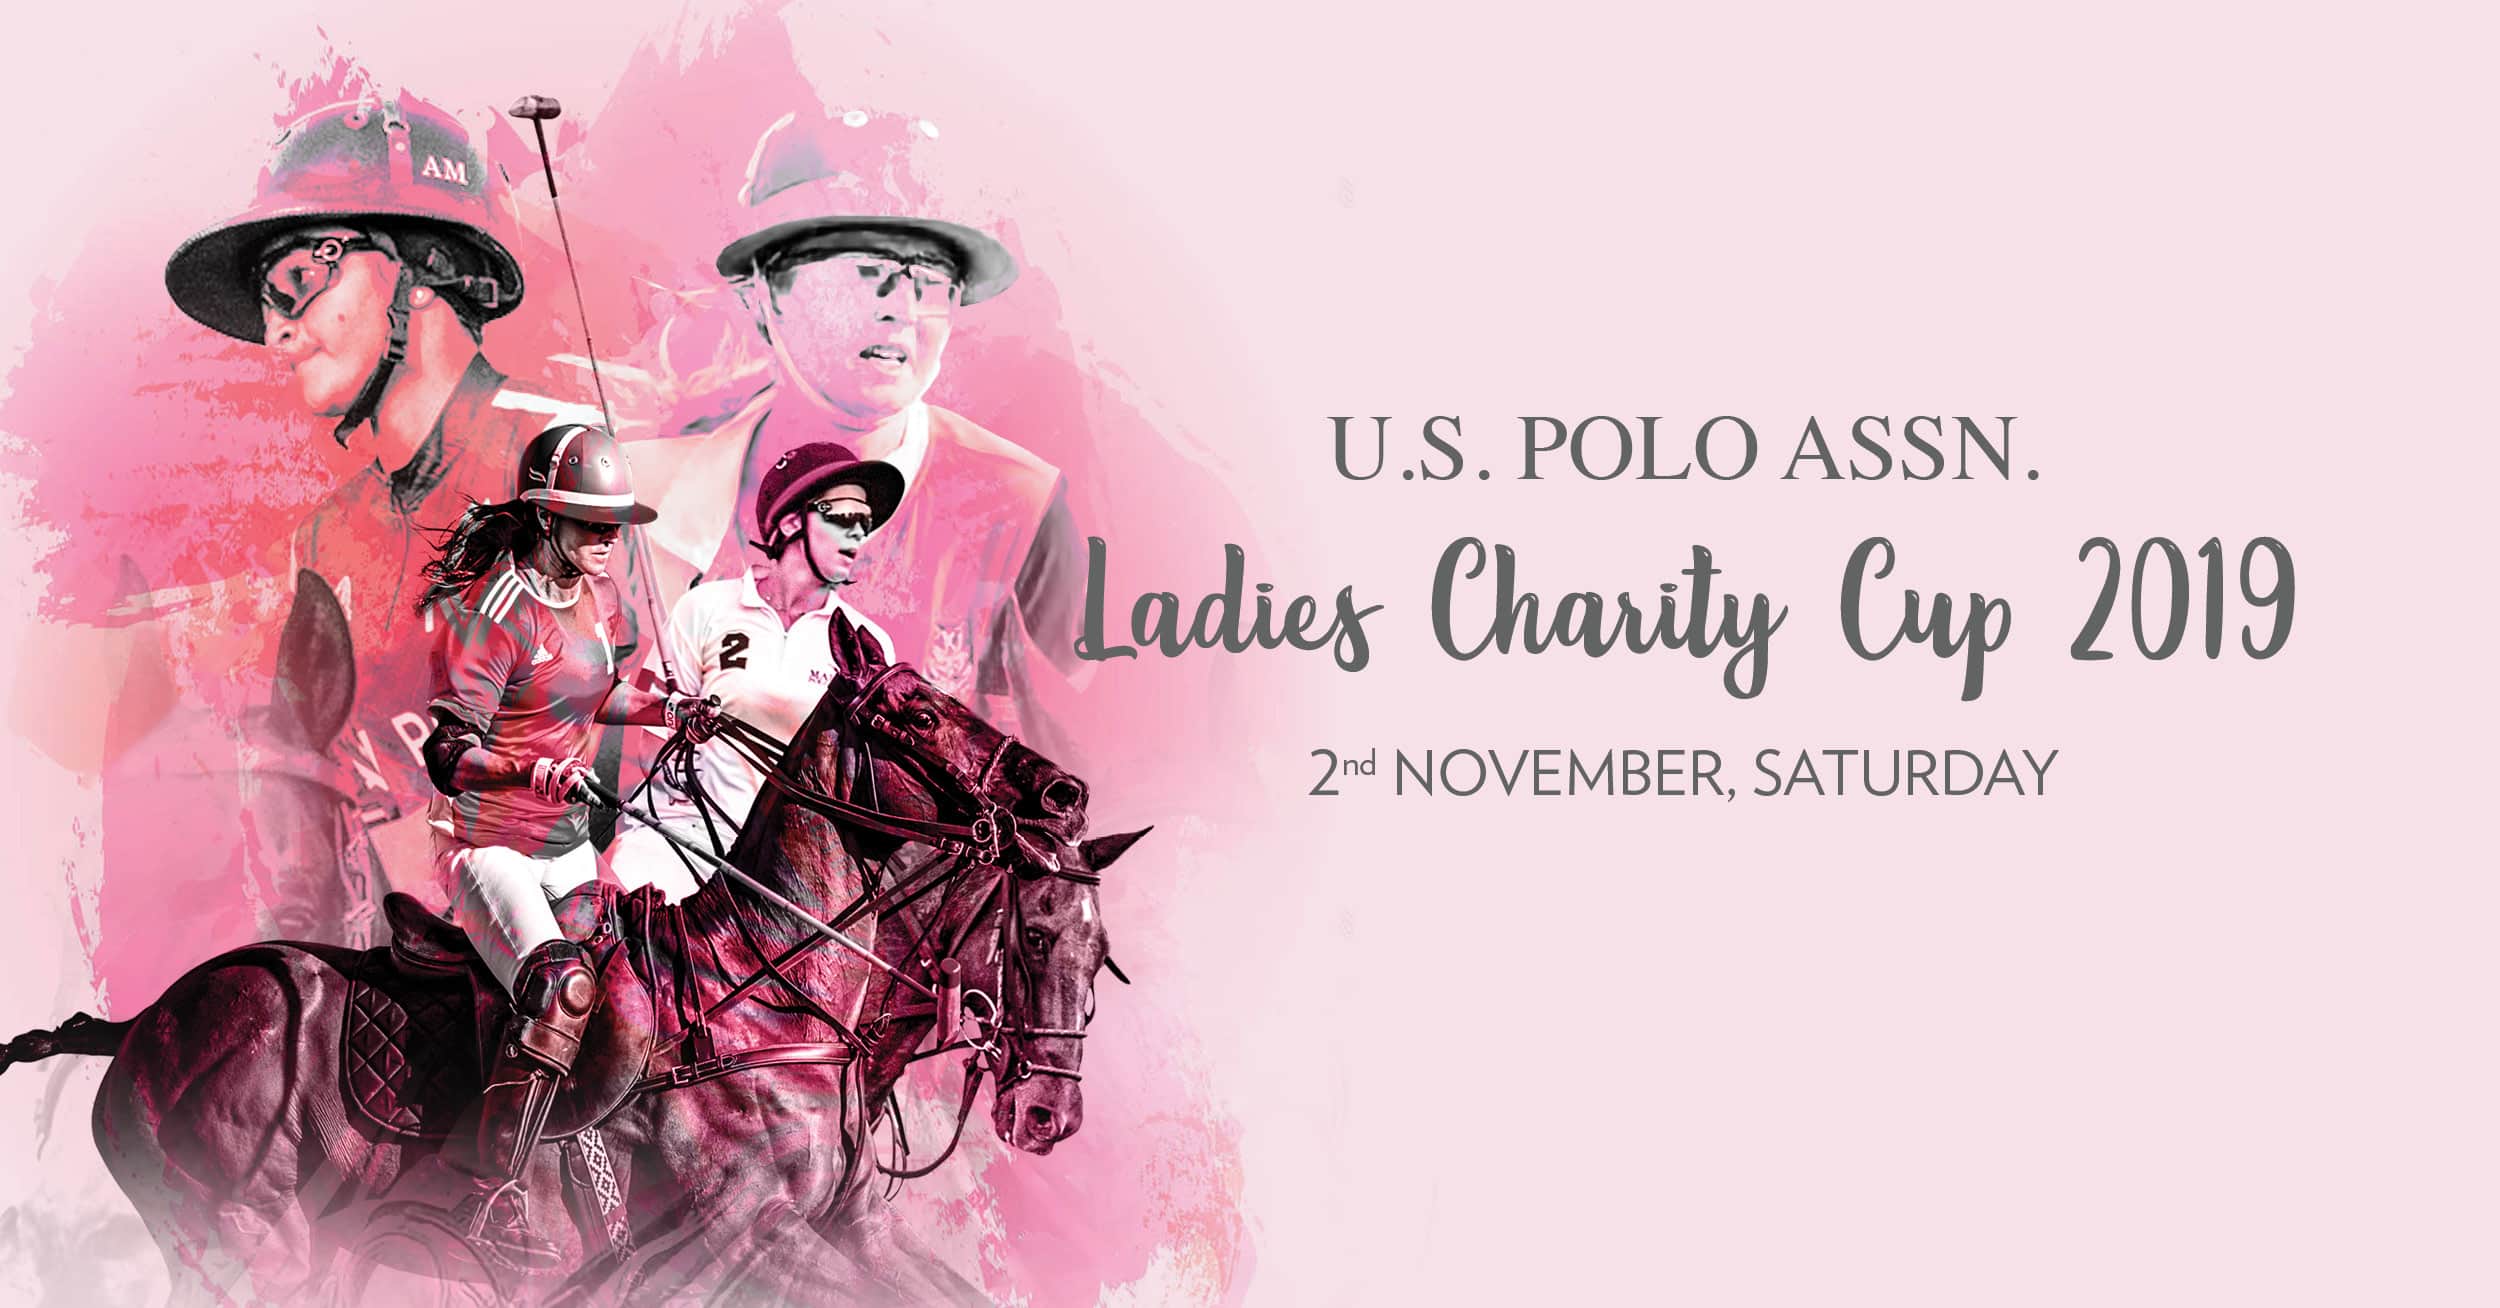 U.S. Polo Assn. Ladies Charity Cup